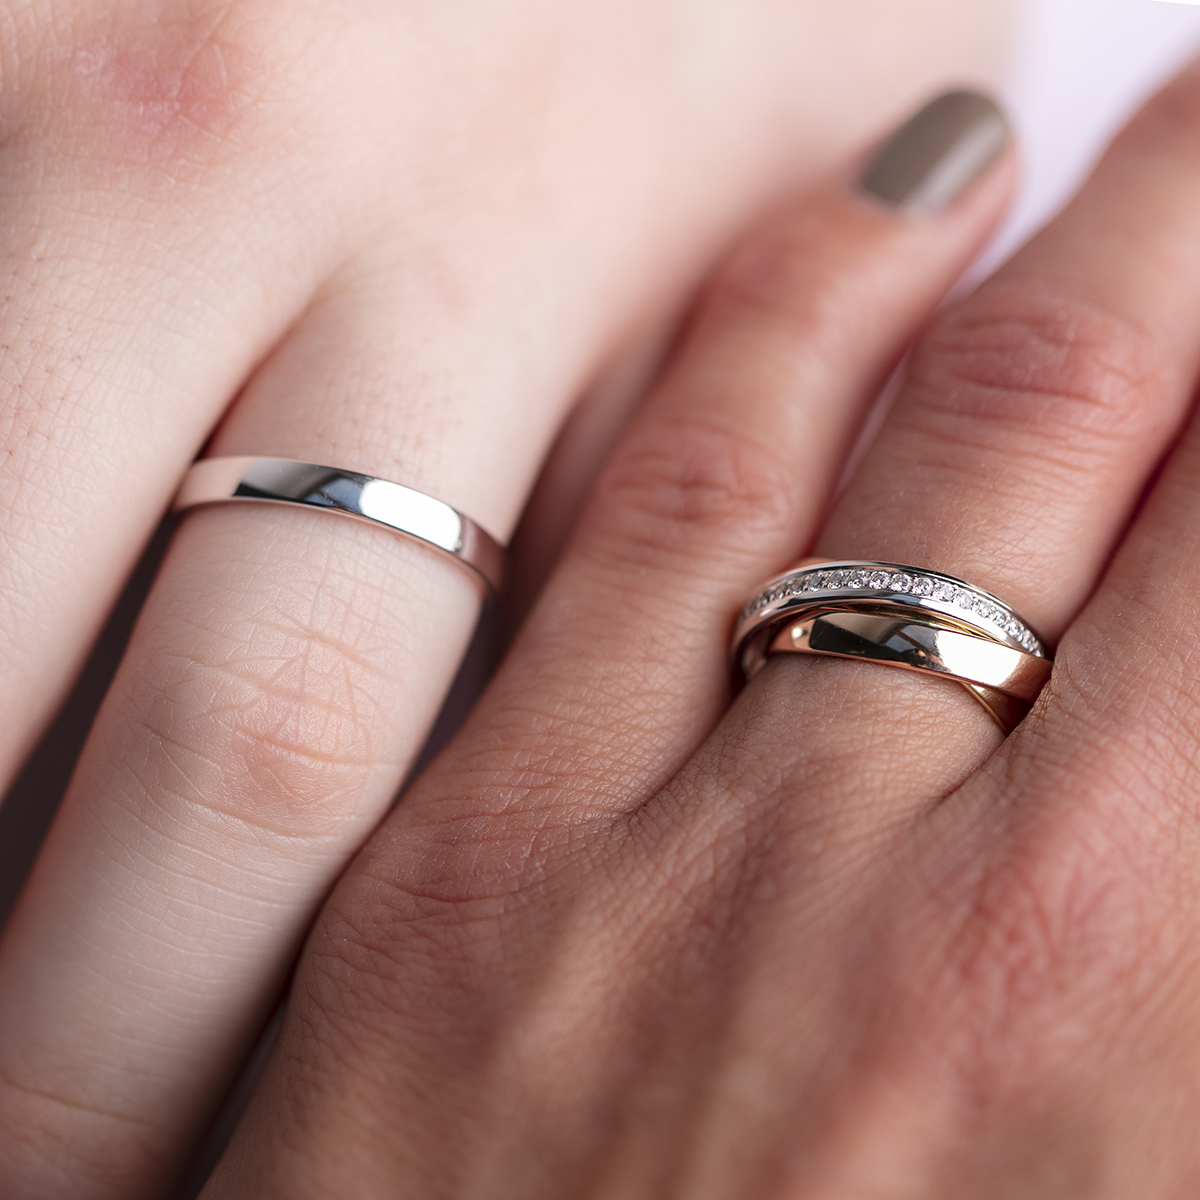 Wedding Bands vs. Wedding Rings vs. Engagement Rings - Whats The  Difference? | Yadav Diamonds and Jewelry